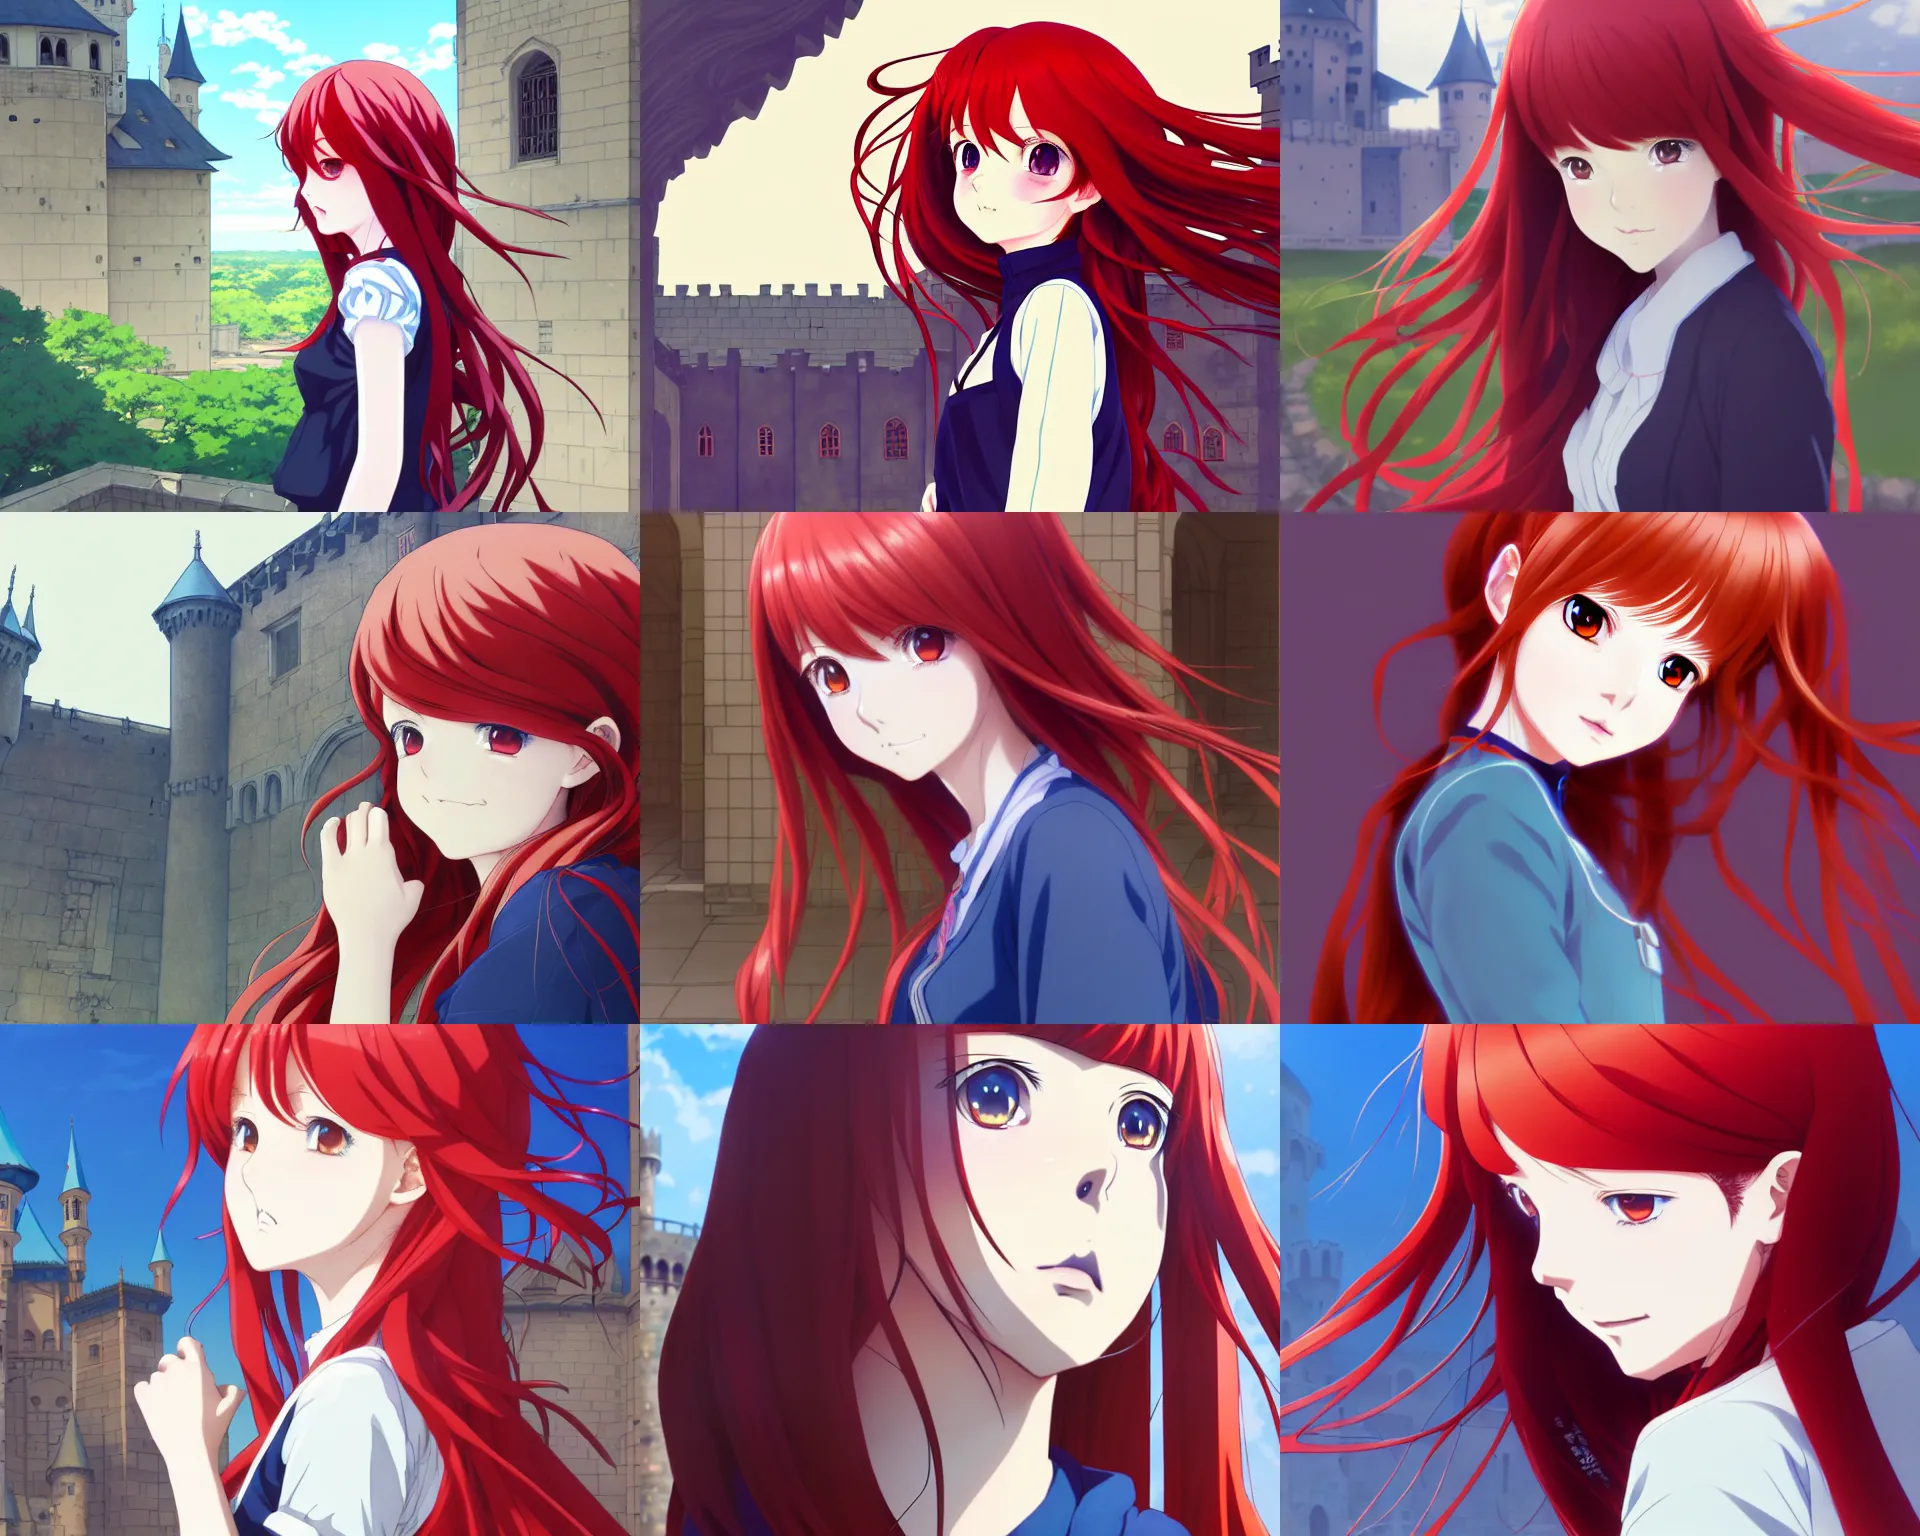 Prompt: anime visual, portrait of a curious young woman with long red hair looking at a medieval palace, cute face by ilya kuvshinov, yoh yoshinari, dynamic pose, dynamic perspective, cel shaded, flat shading mucha, rounded eyes, moody, psycho pass, kyoani, blue tint